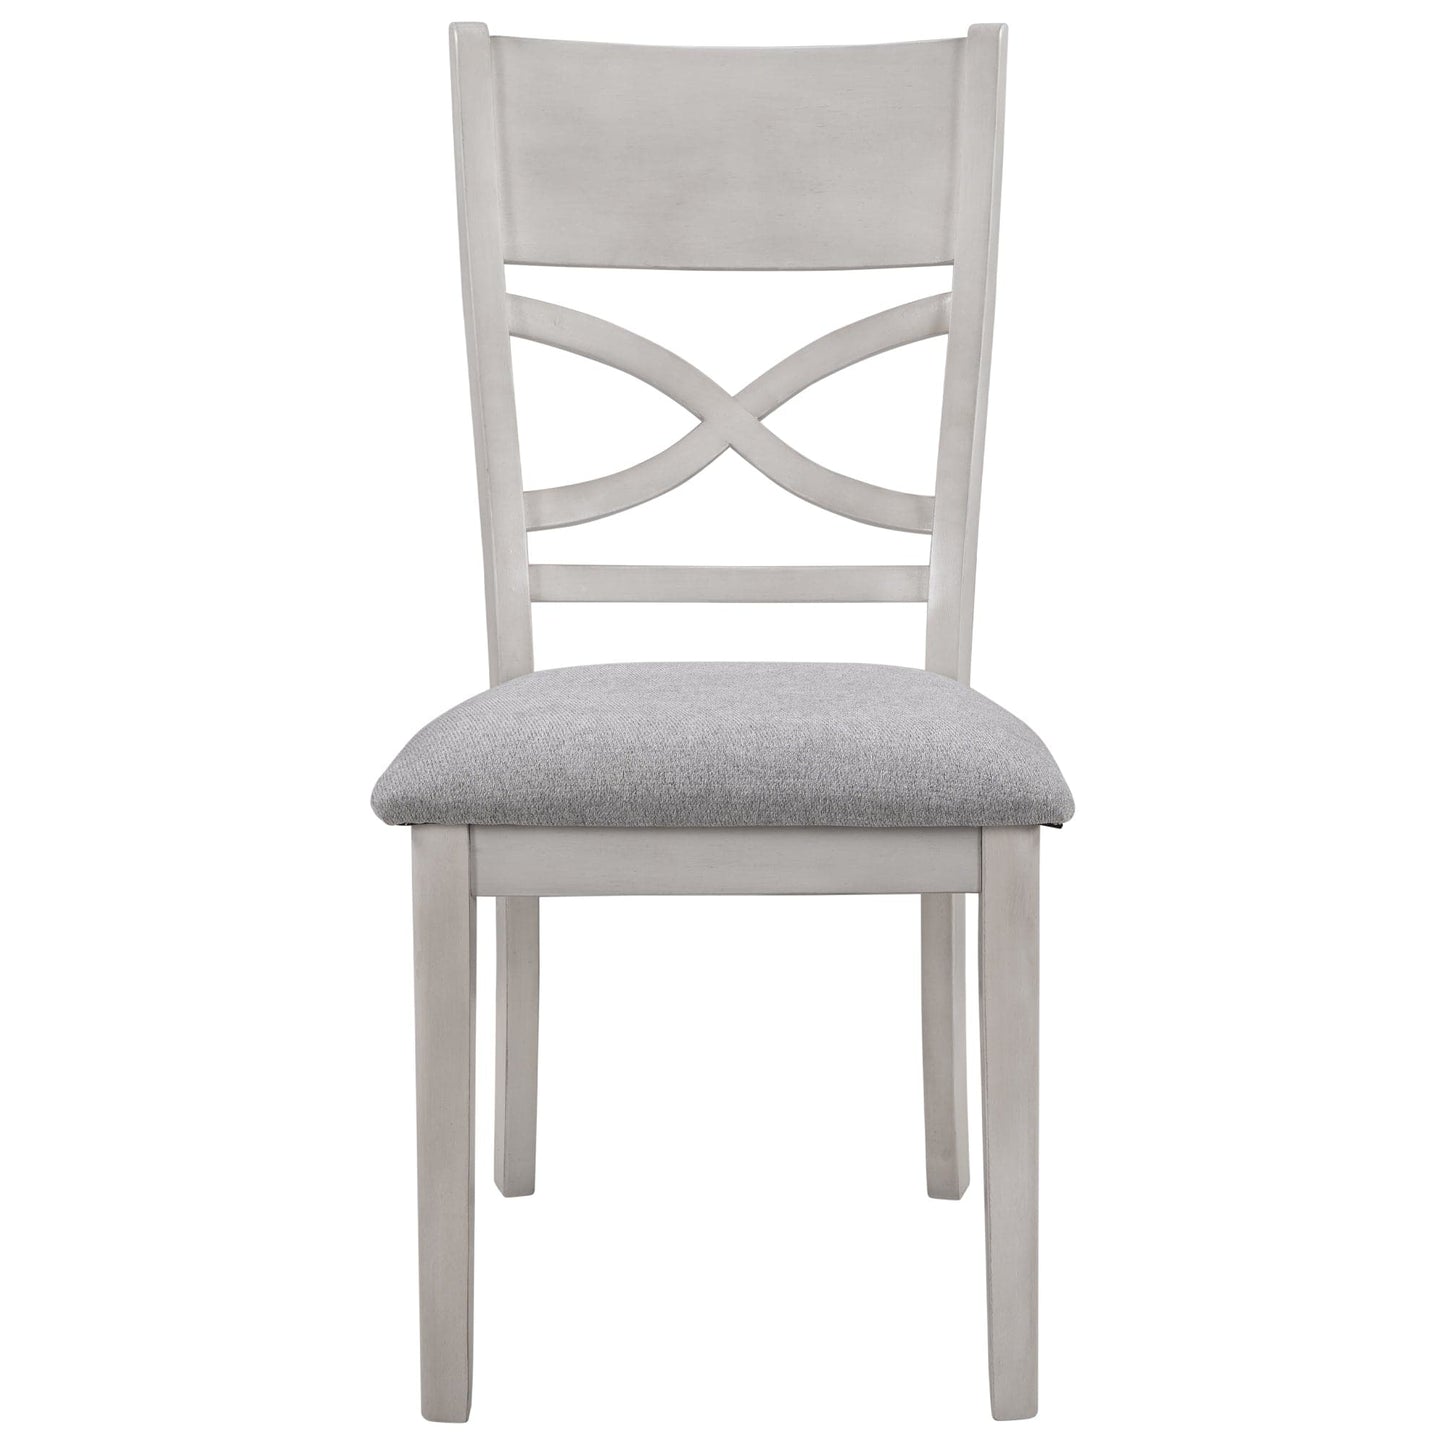 1st Choice Furniture Direct Dining Chair Set 1st Choice Rustic Wood 4-Piece Kitchen Chairs in Light Grey+White